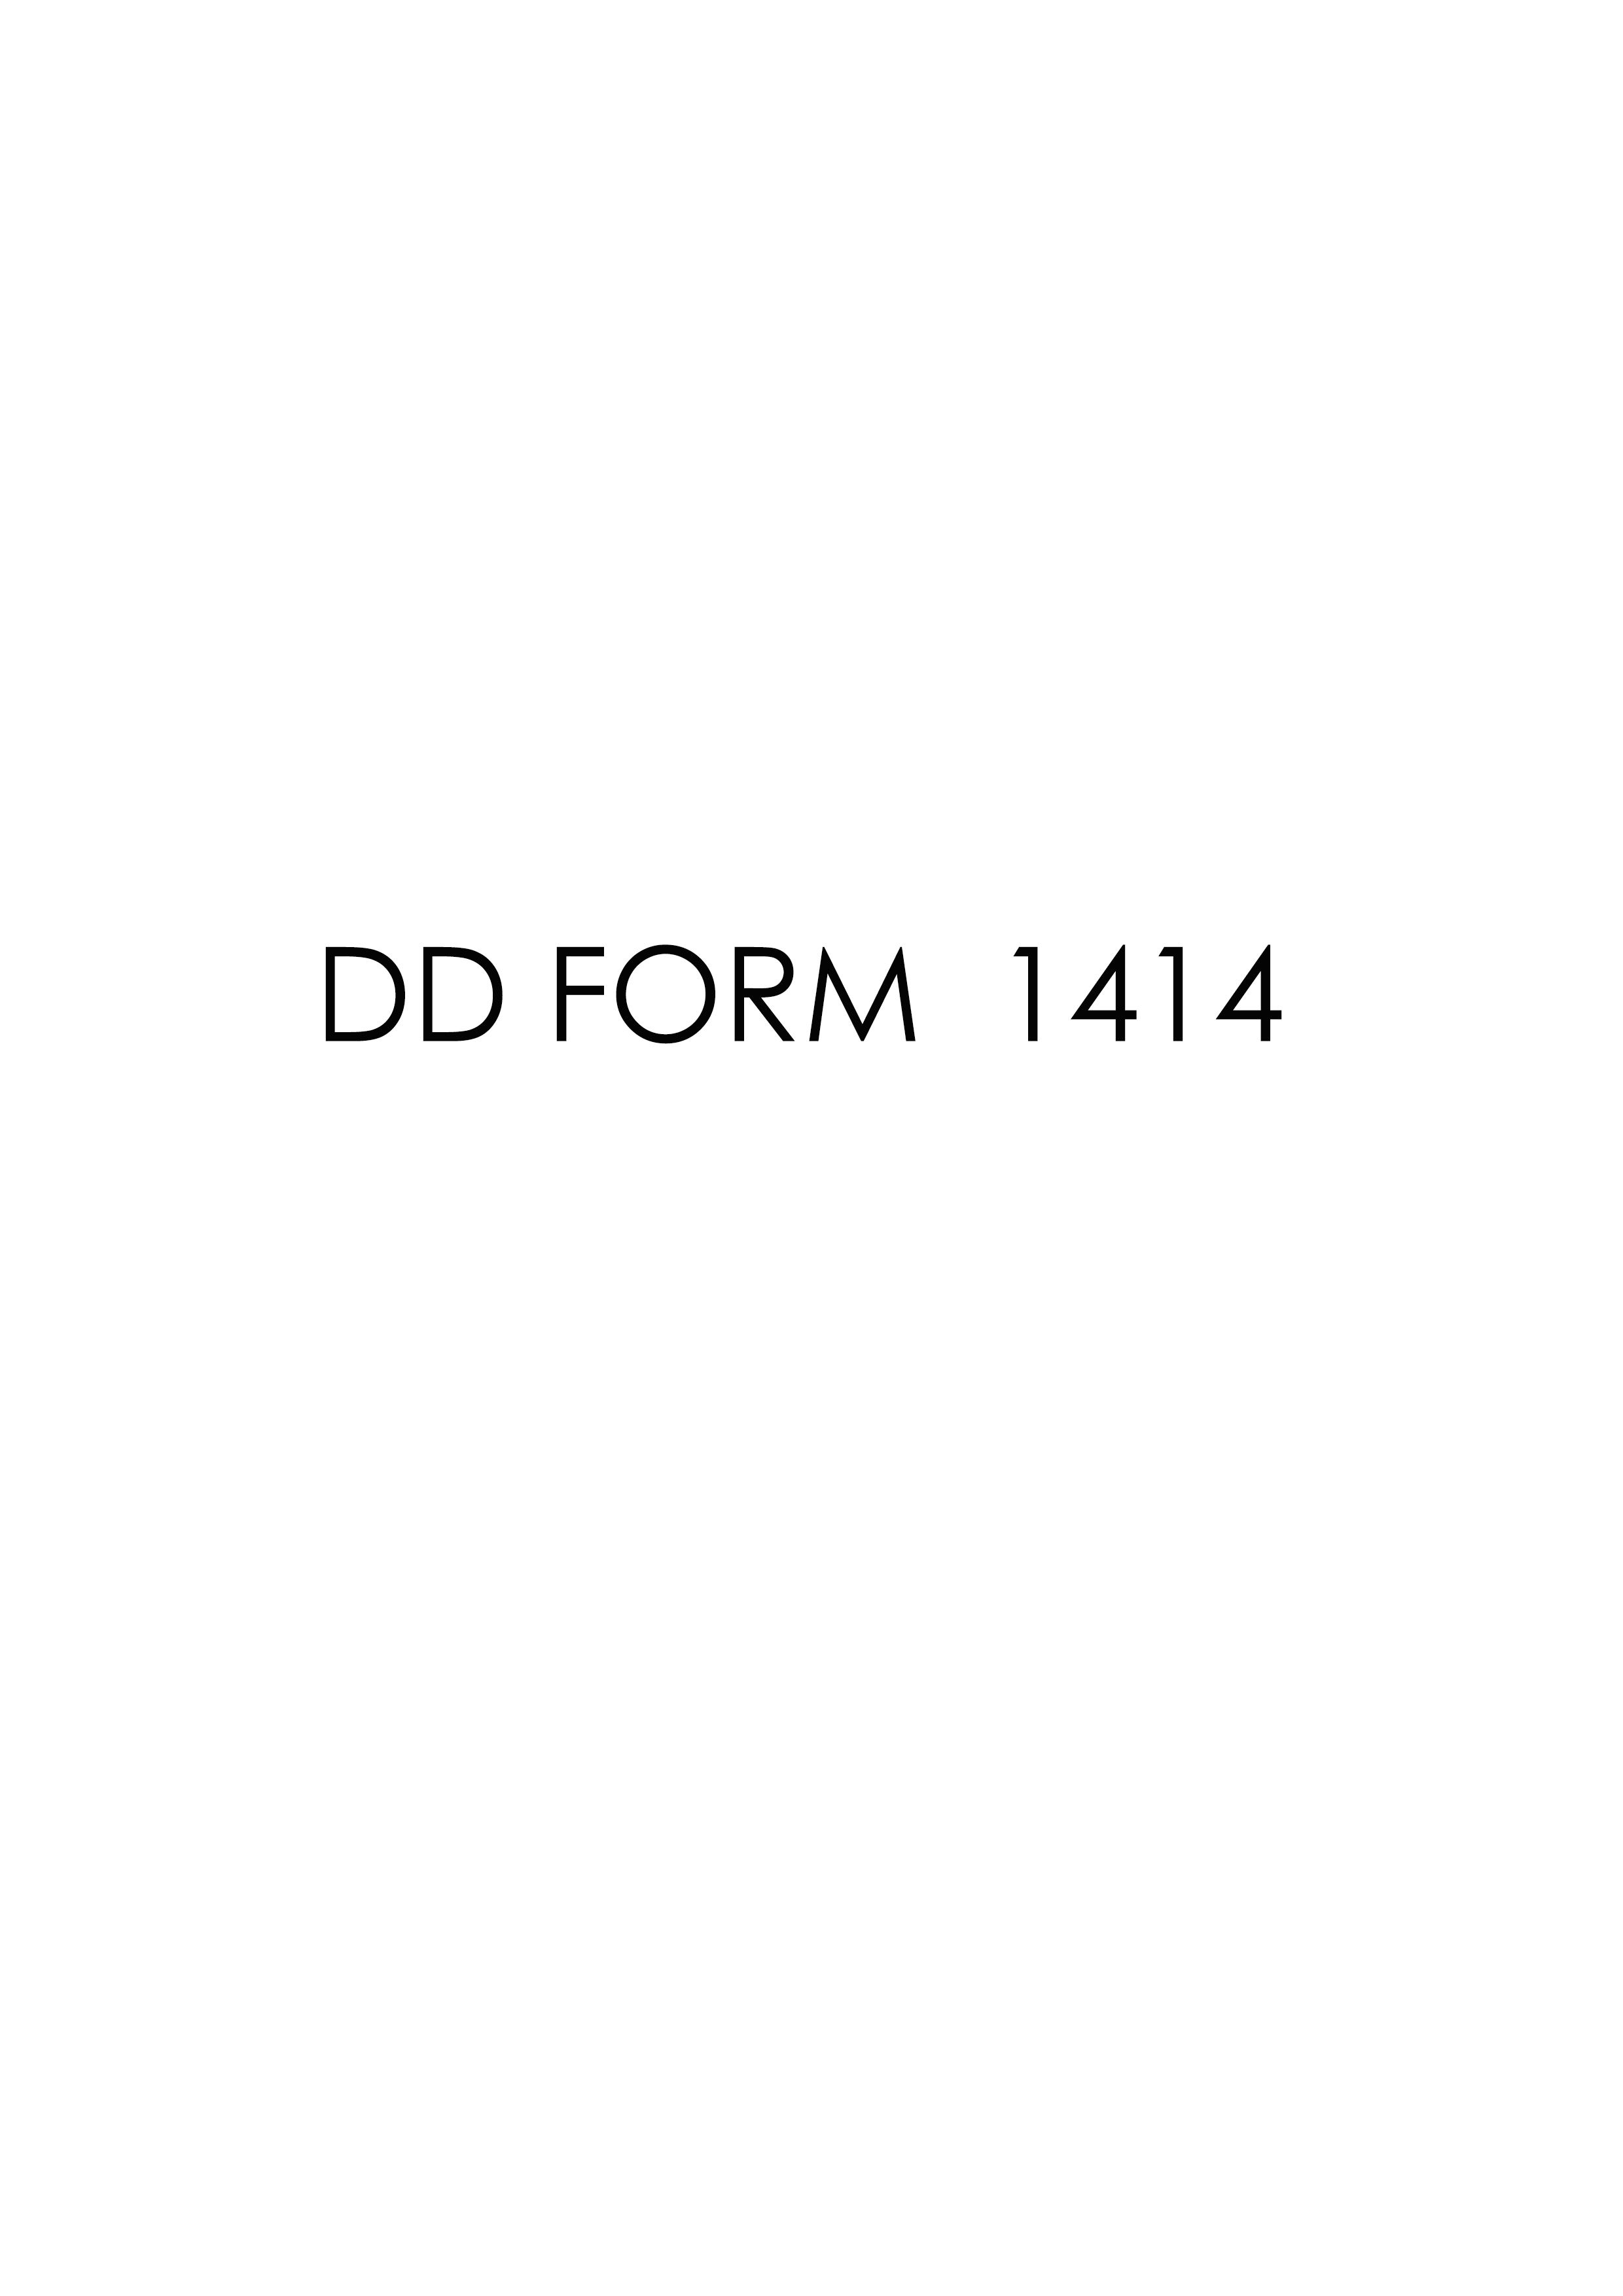 Download Fillable dd Form 1414